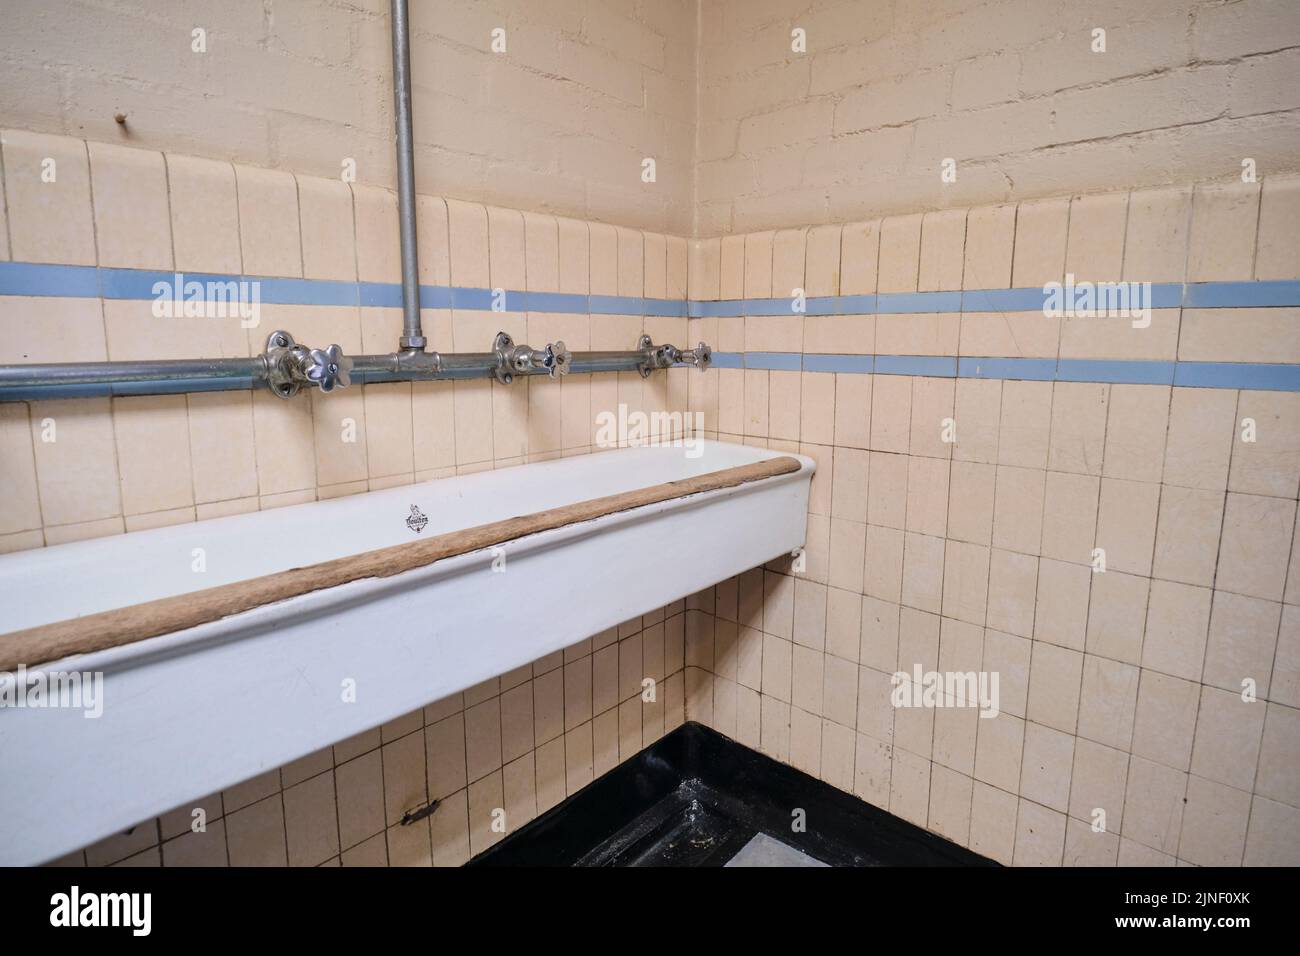 Big, communal, trough tiled sinks, for miners to use for washing hands, arms before entering the locker, changing area. At the Big Pit National Coal M Stock Photo